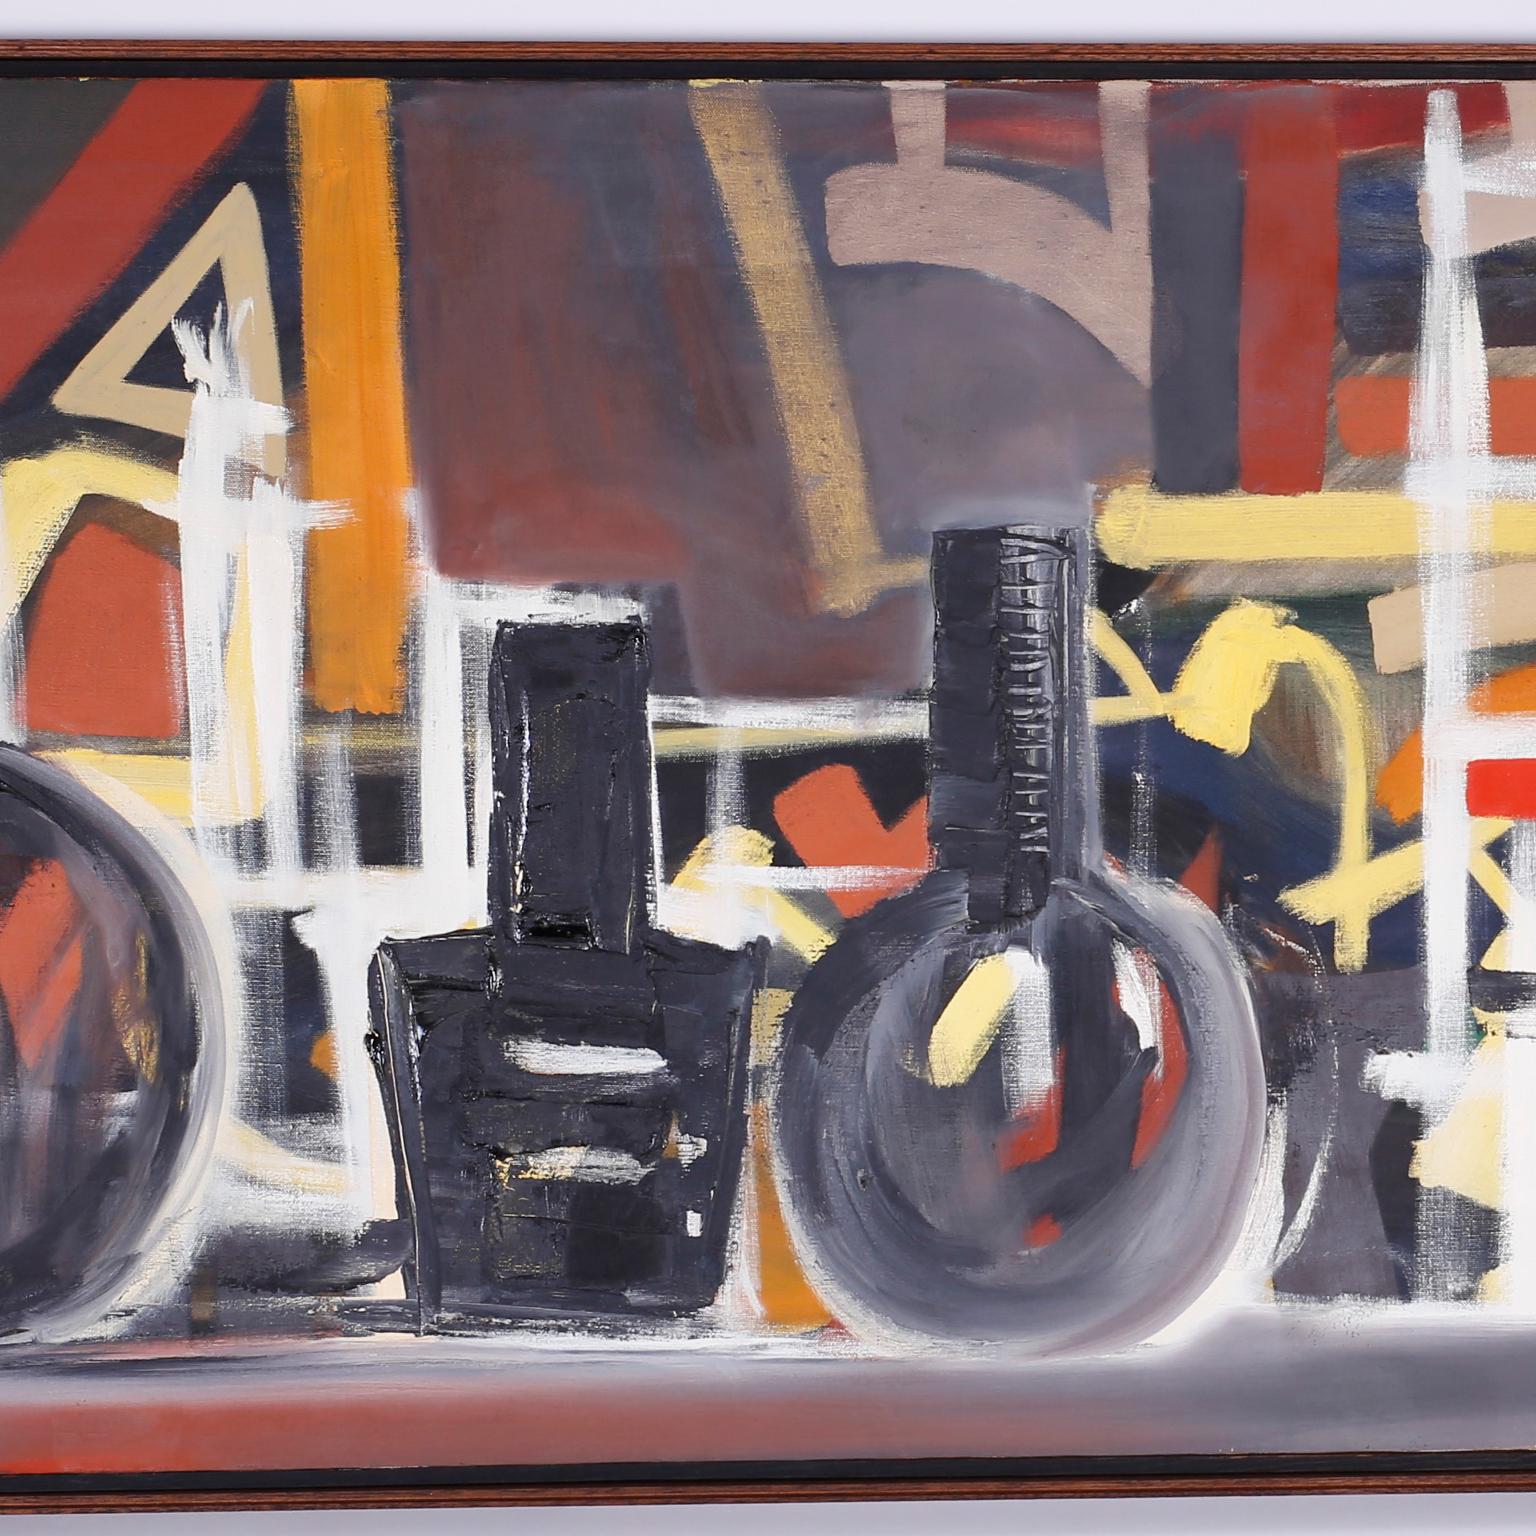 Midcentury still life oil painting on canvas with a modern perspective depicting three vessels against an abstract background. Signed A. Weber 1968 in the lower right and presented in its original frame.